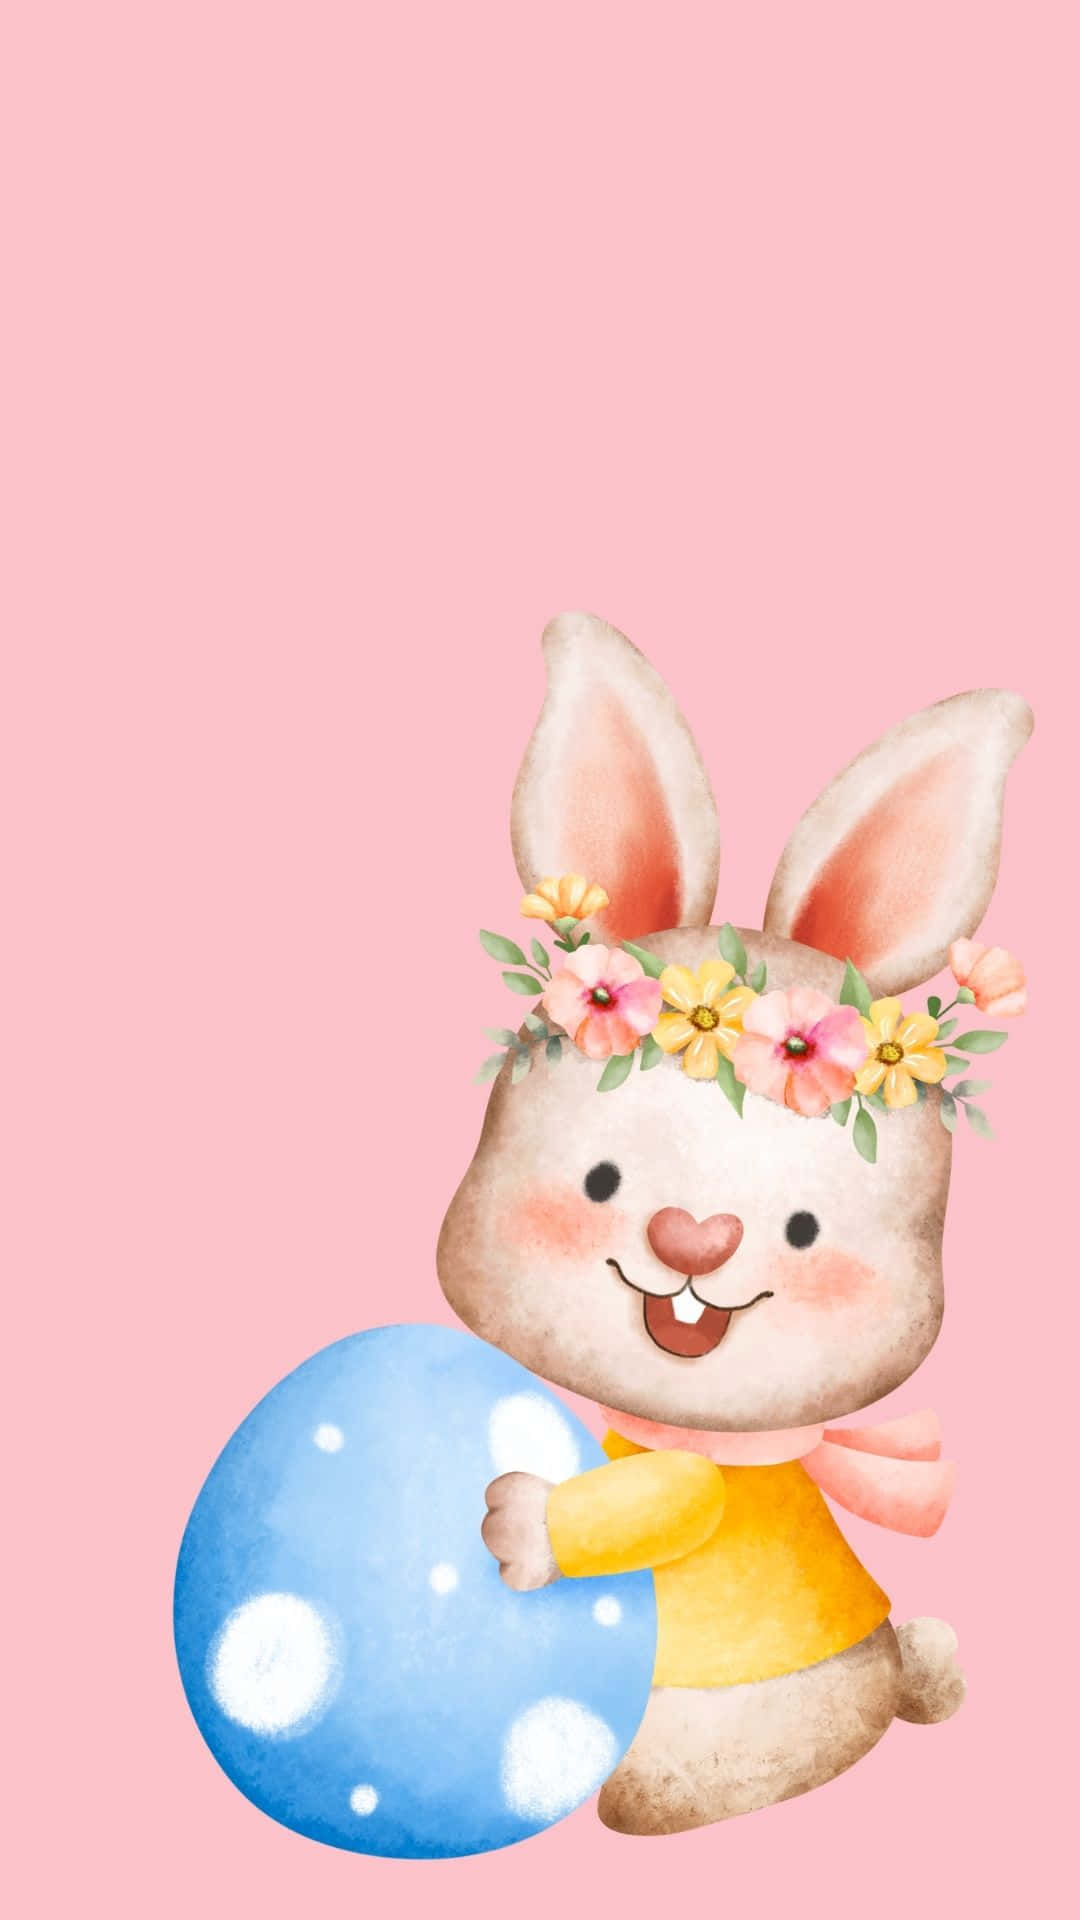 "The Easter Bunny Arrives!" Wallpaper